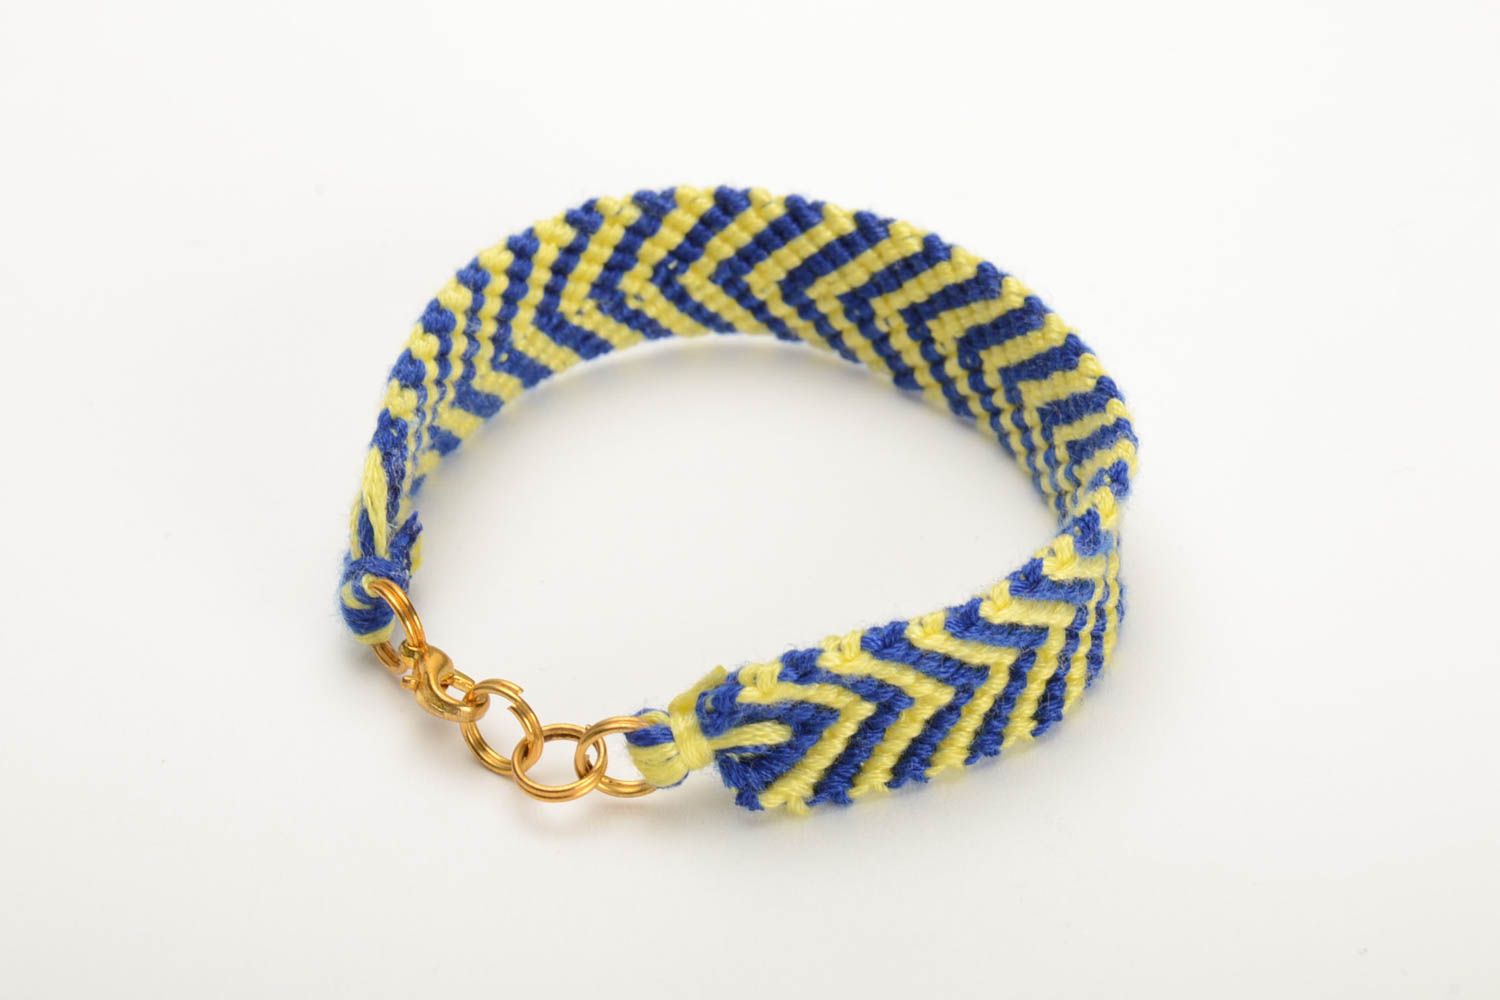 Braided handmade friendship bracelet made of floss thread delicate beautiful yellow and blue accessory photo 3